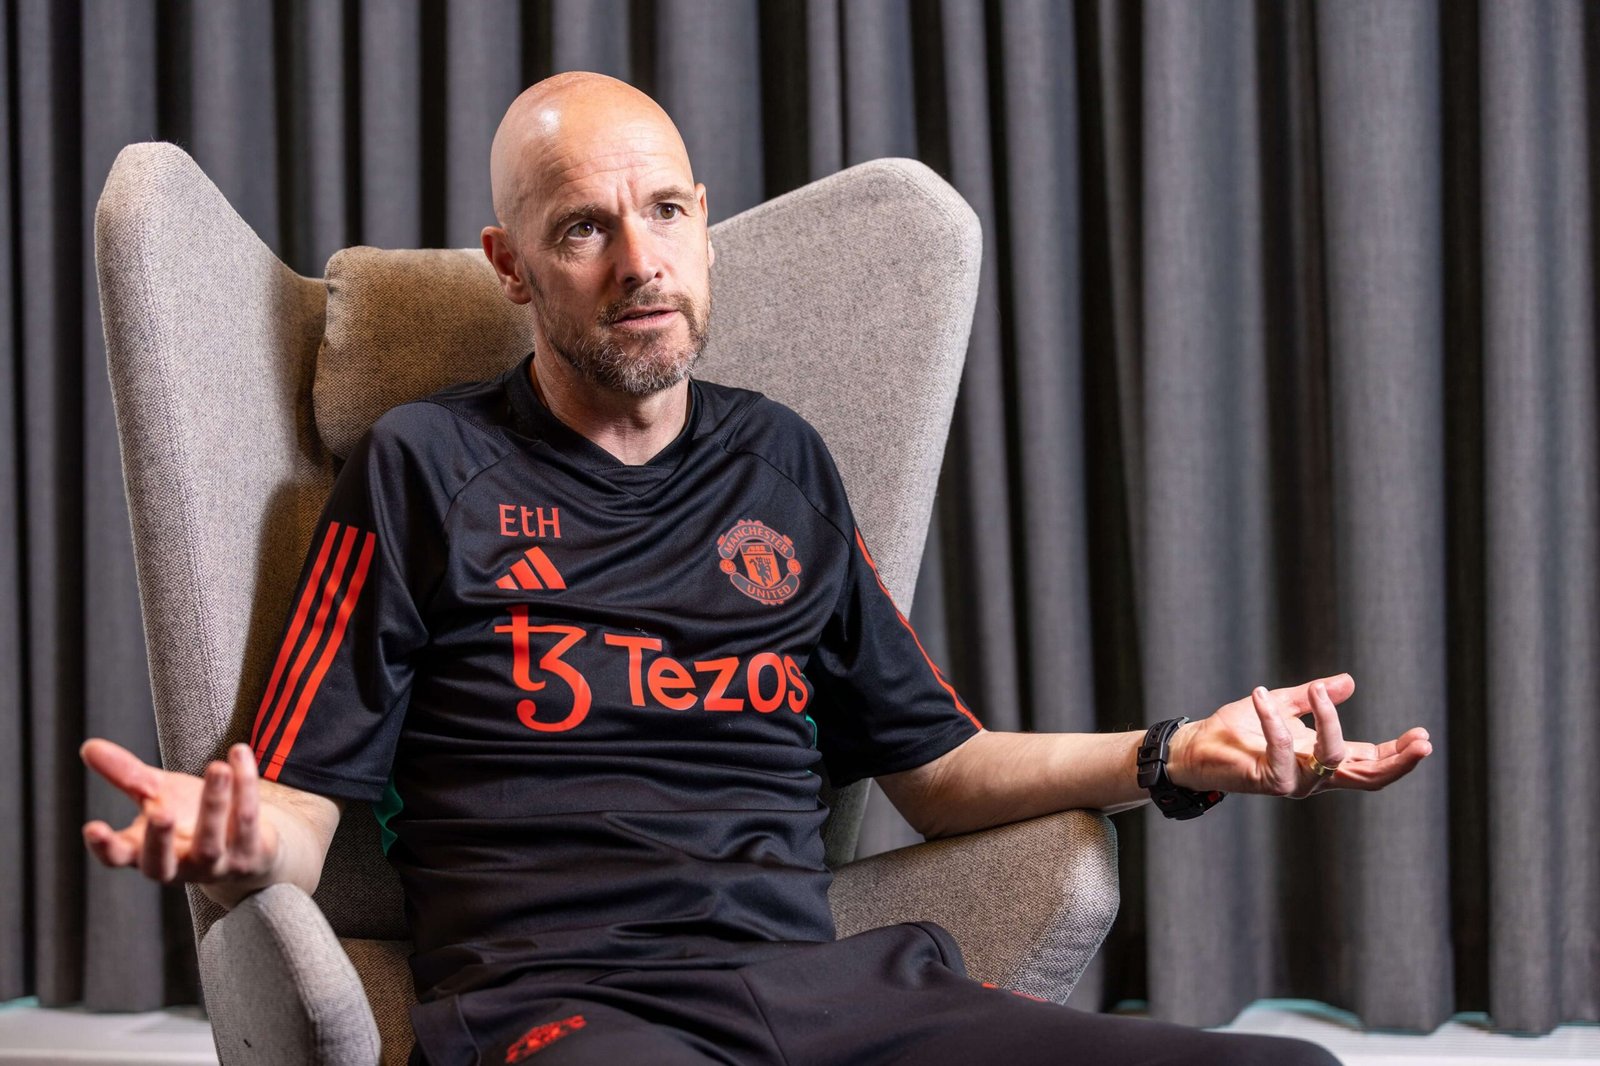 Manchester United manager Erik ten Hag statements may have put more pressure on him been "sacked"